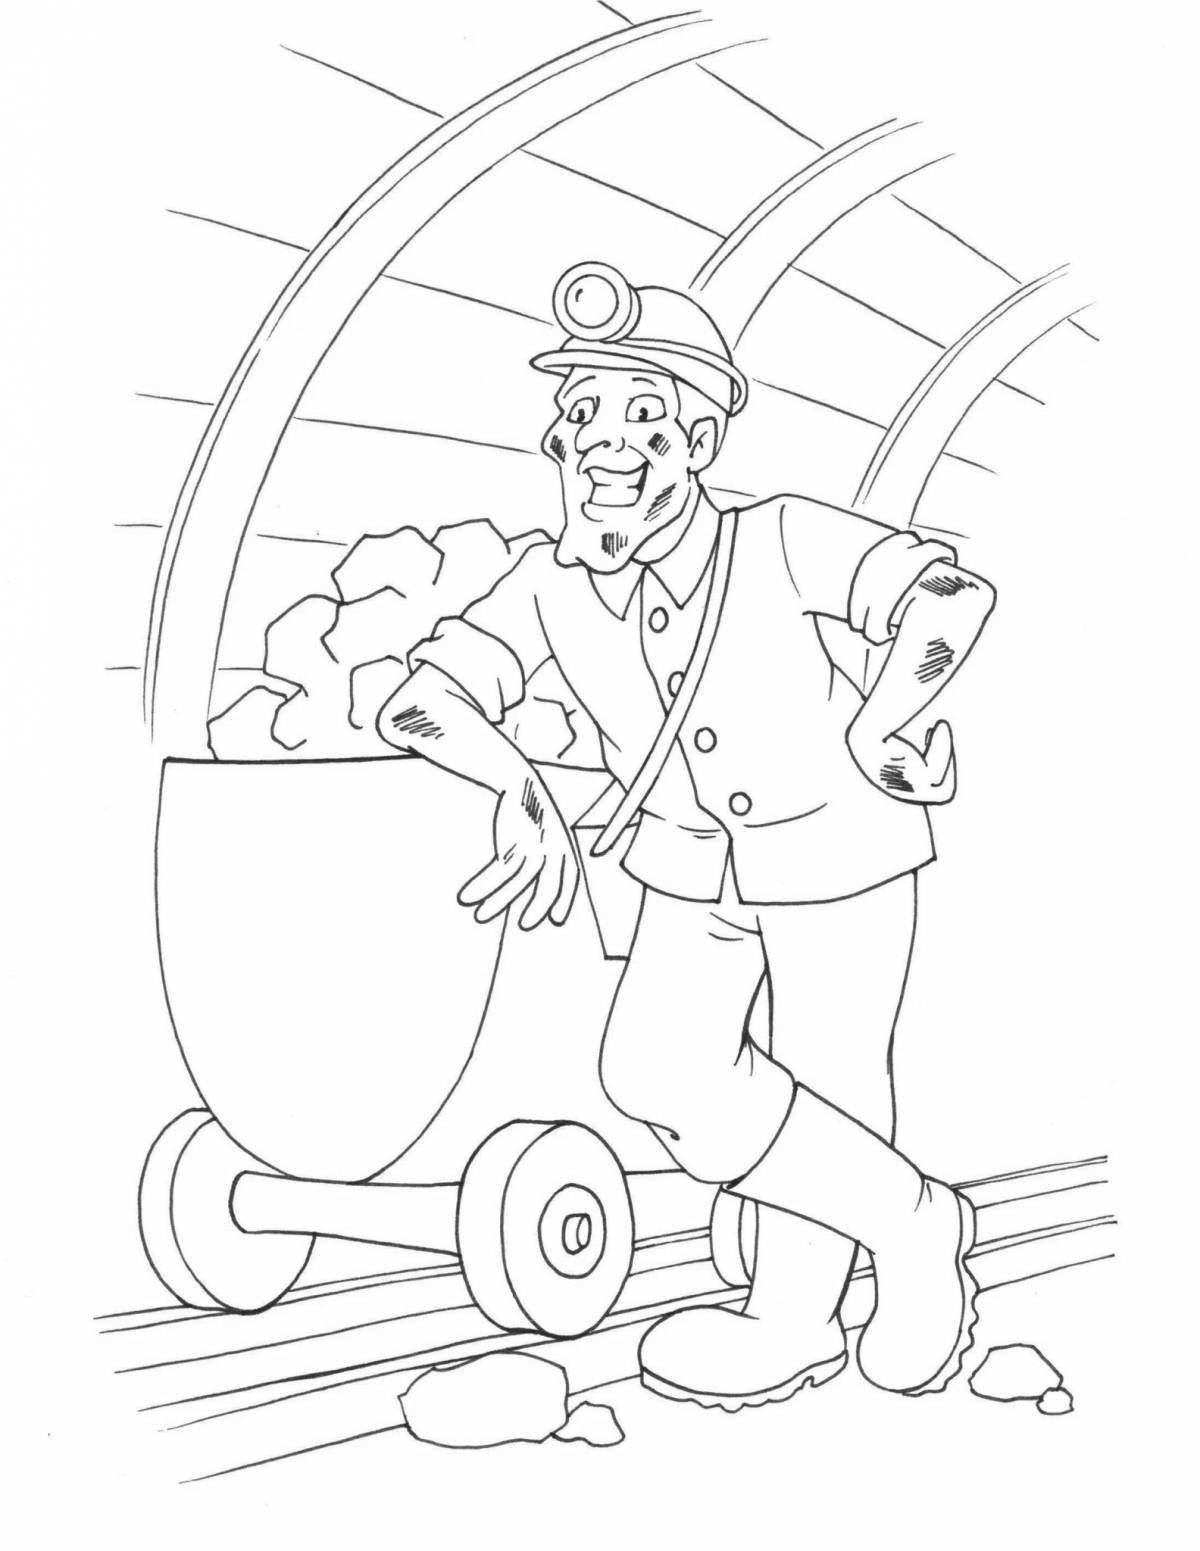 Miner holiday coloring